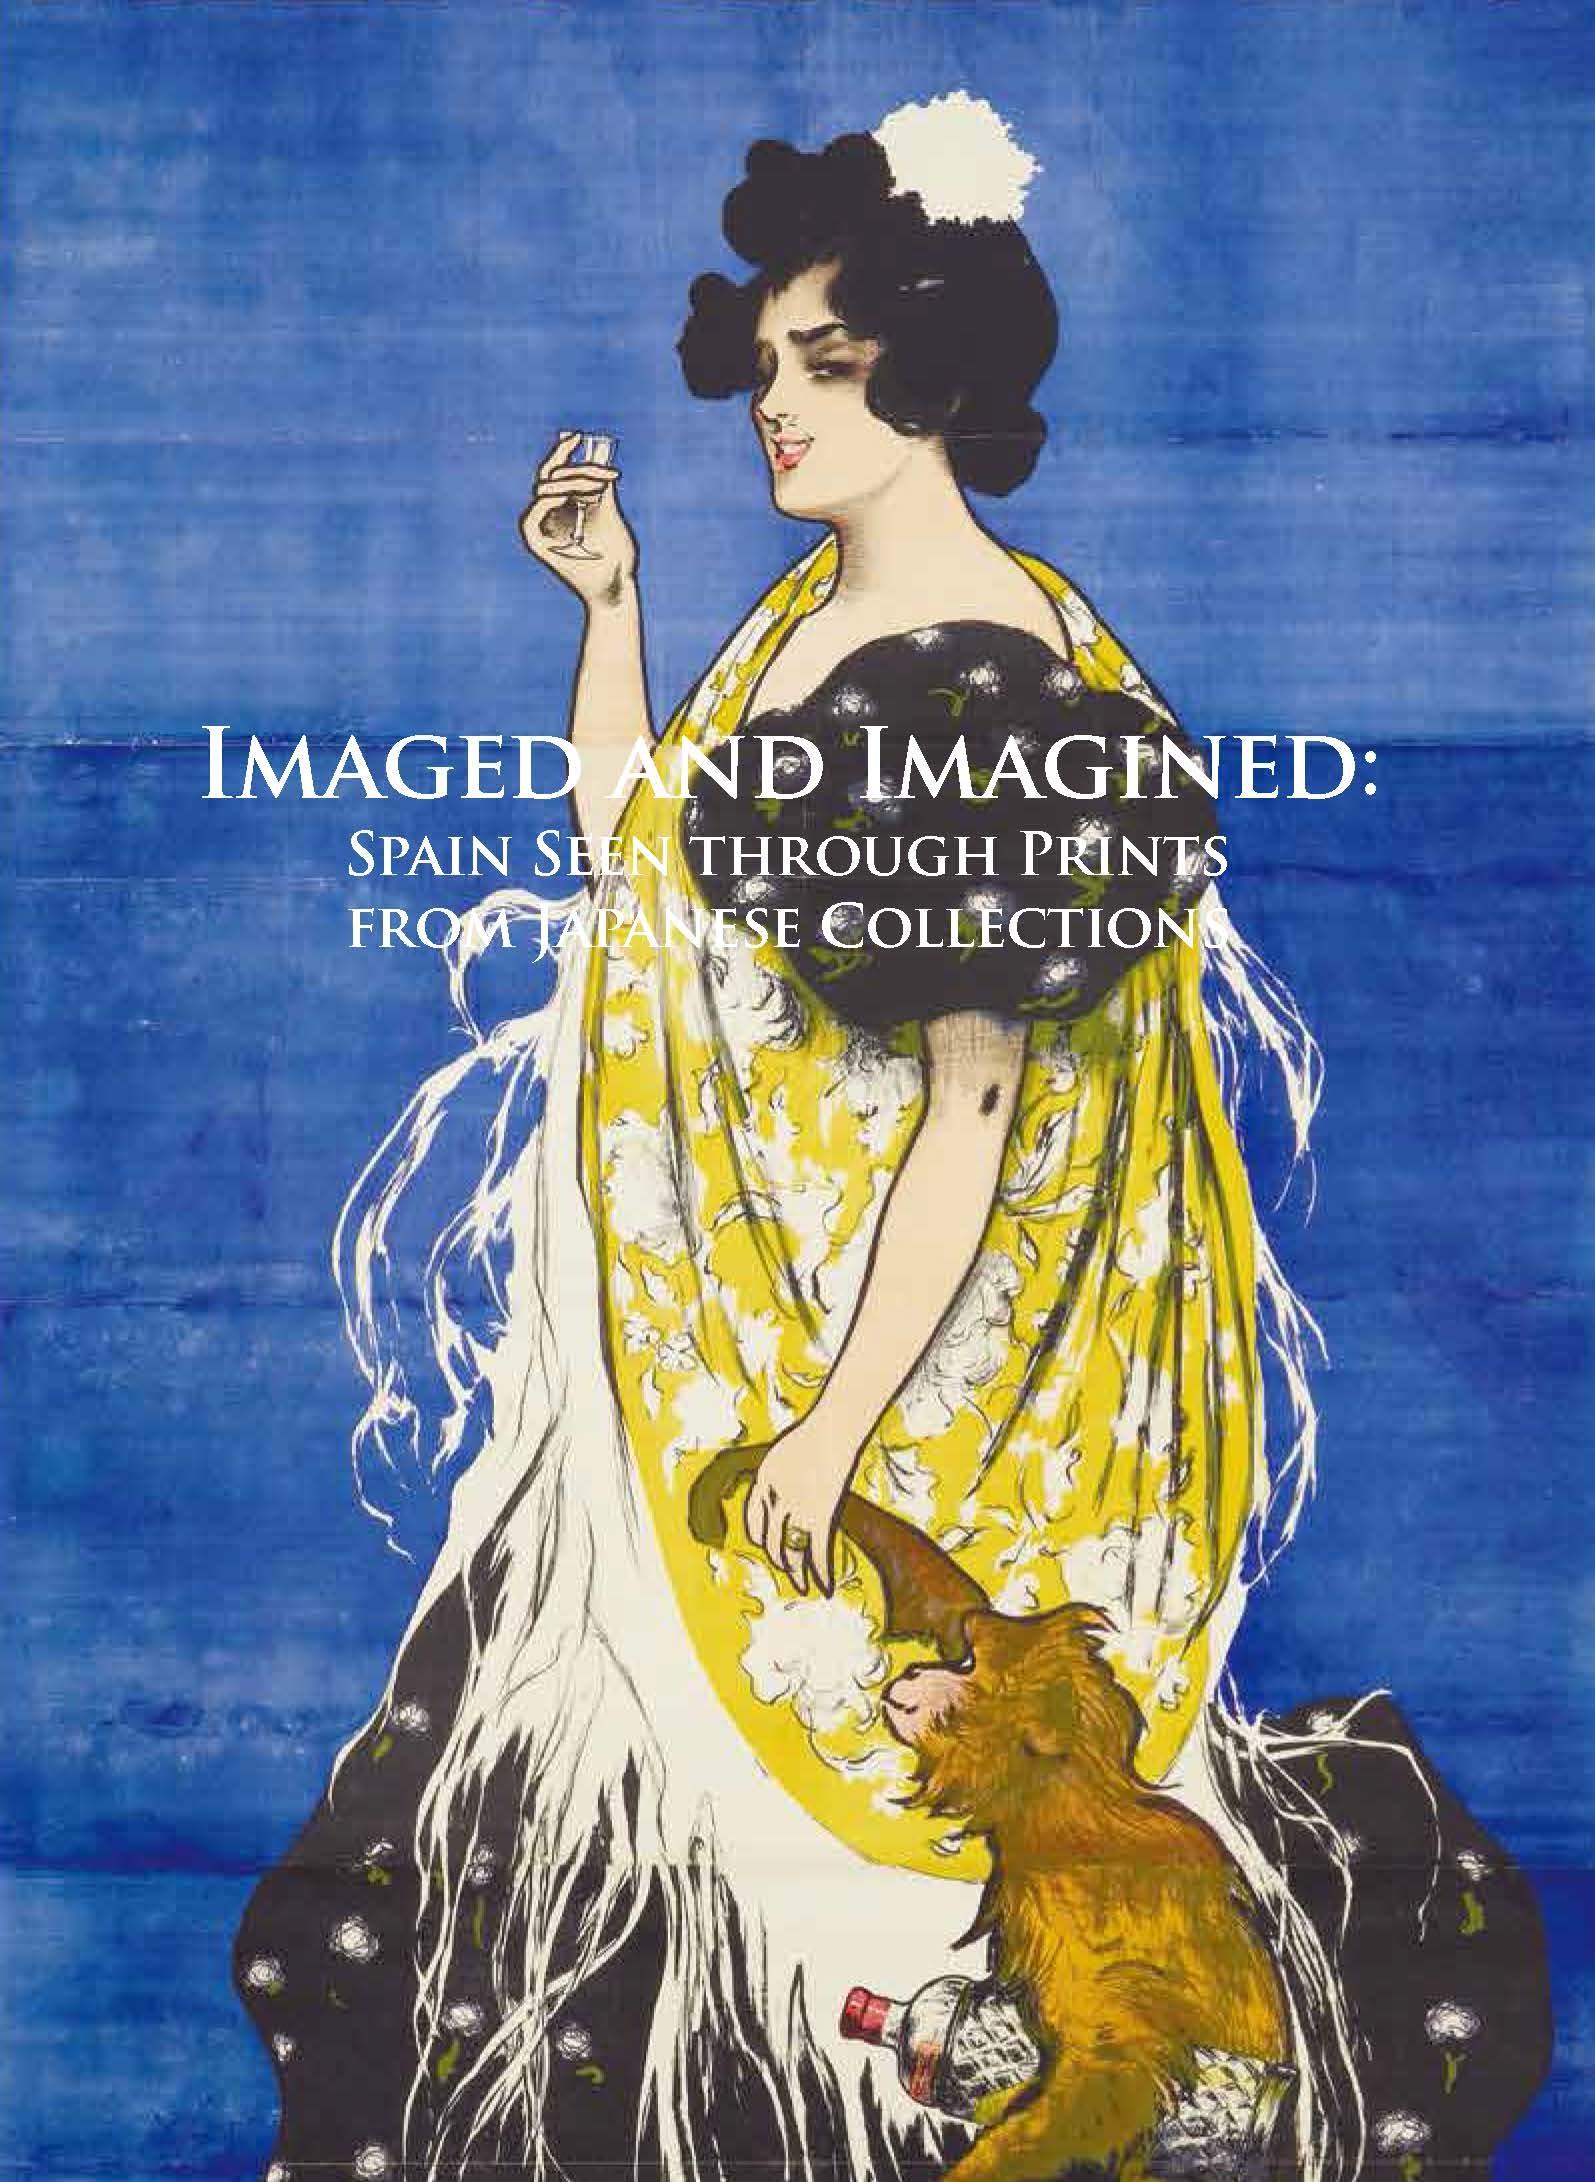 IMAGED AND IMAGINED "SPAIN SEEN THROUGH IN JAPANESE COLLECTIONS"